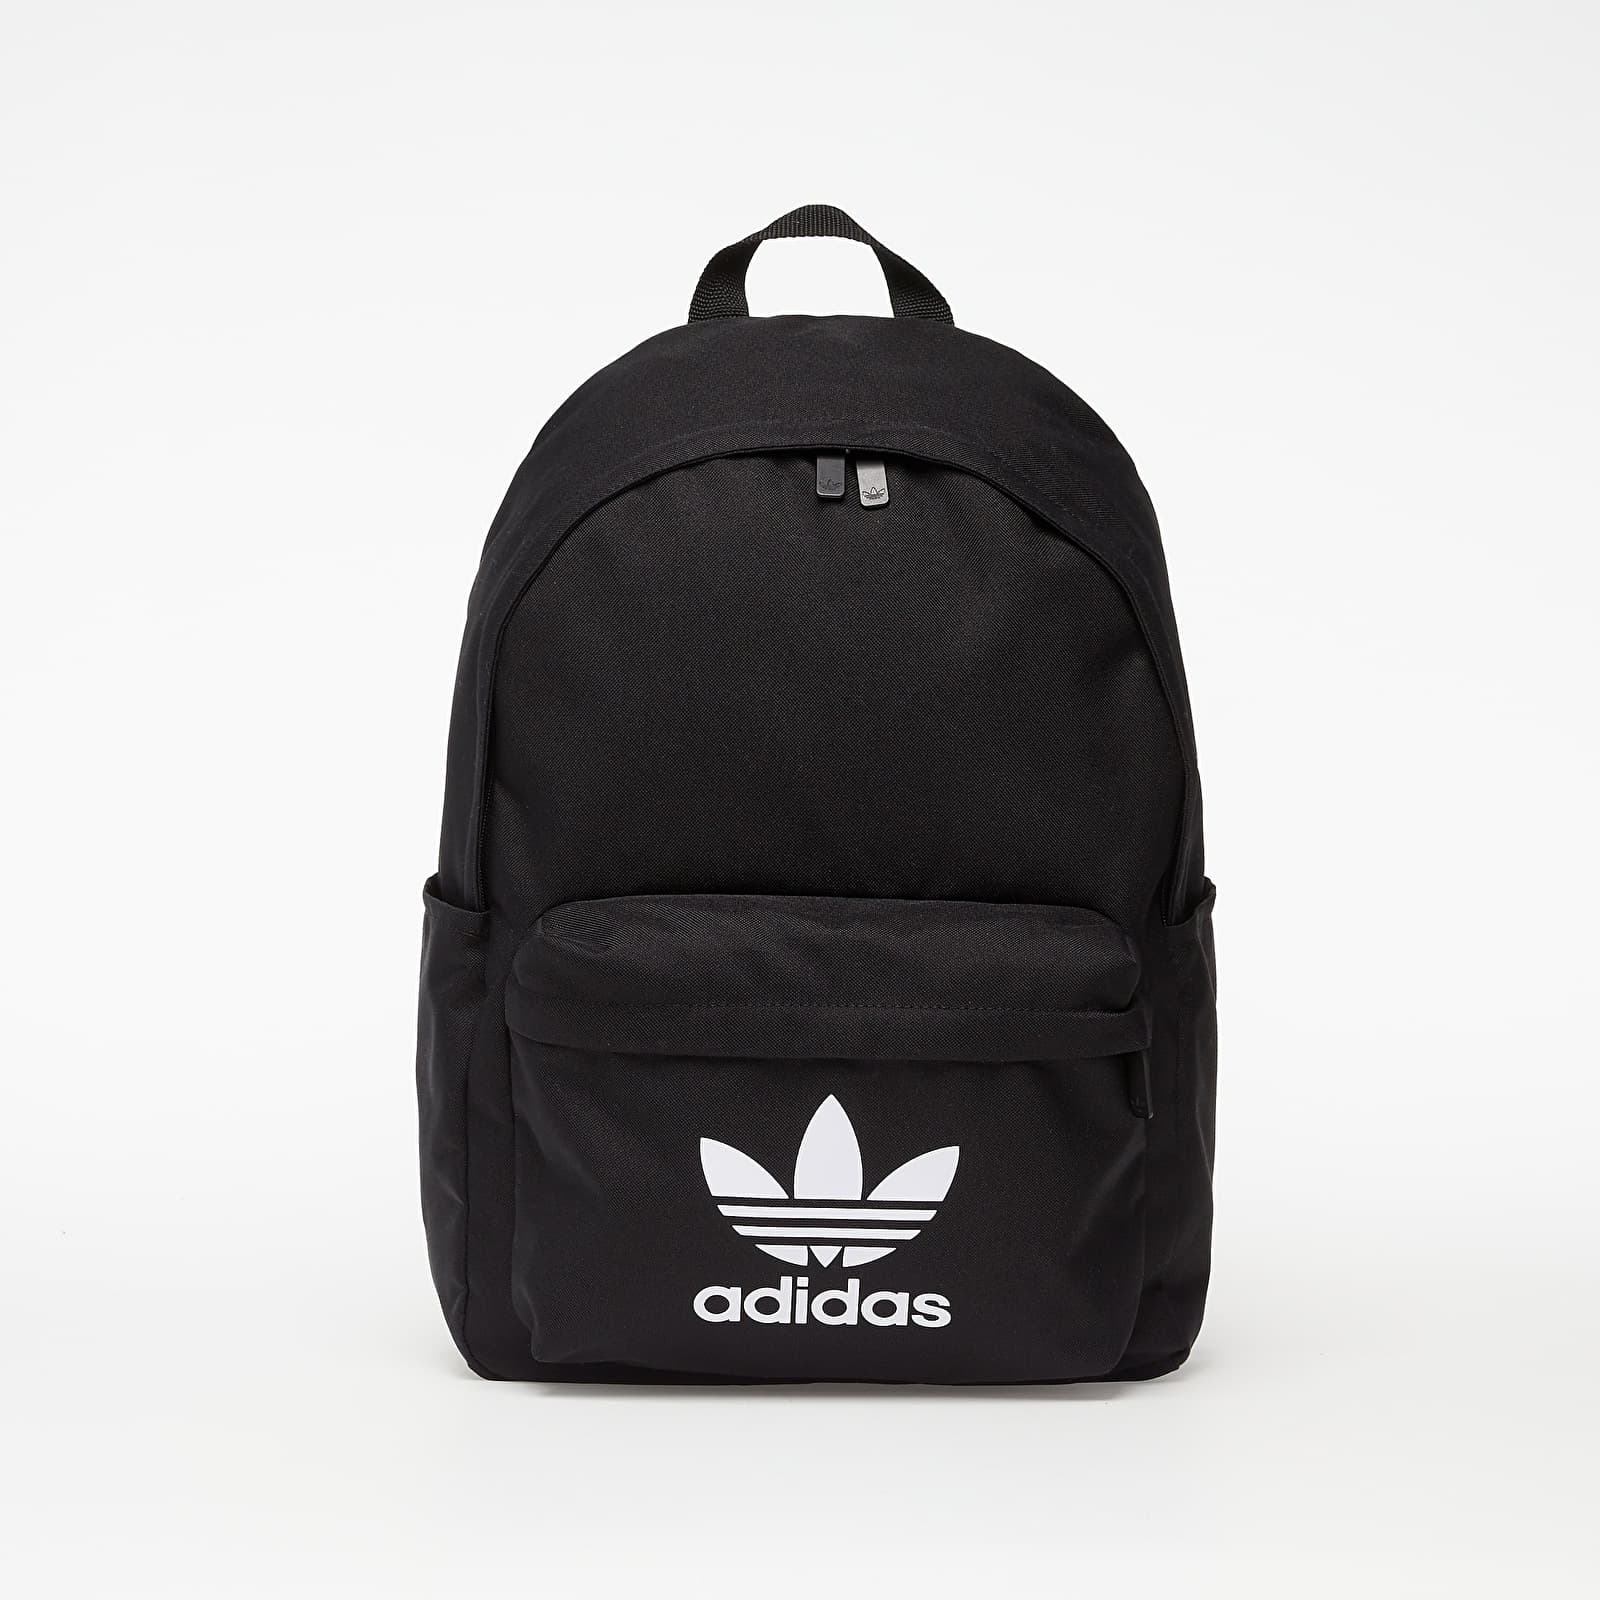 adidas Classic Backpack